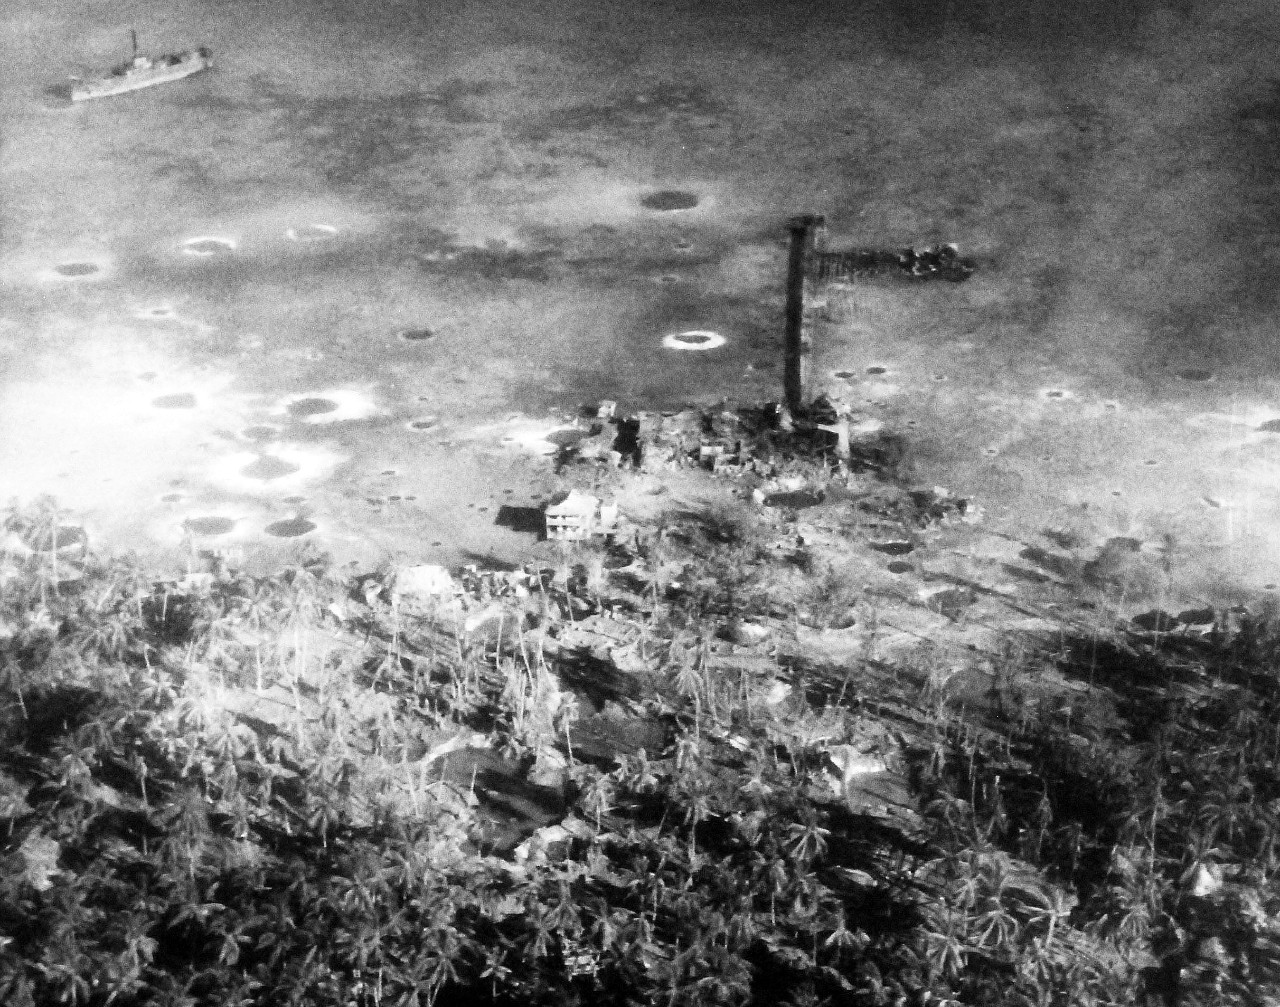 80-G-204729:   Operation Galvanic, November 1943.     Oblique of damage done to enemy positions on Makin Island, Gilbert Islands by bombing and bombardment, 20-21 November 1943 by US forces.   Shell or bomb craters, old hulks, house, revetments.   Official U.S. Navy Photograph, now in the collections of the National Archives.  (2013/09/19).